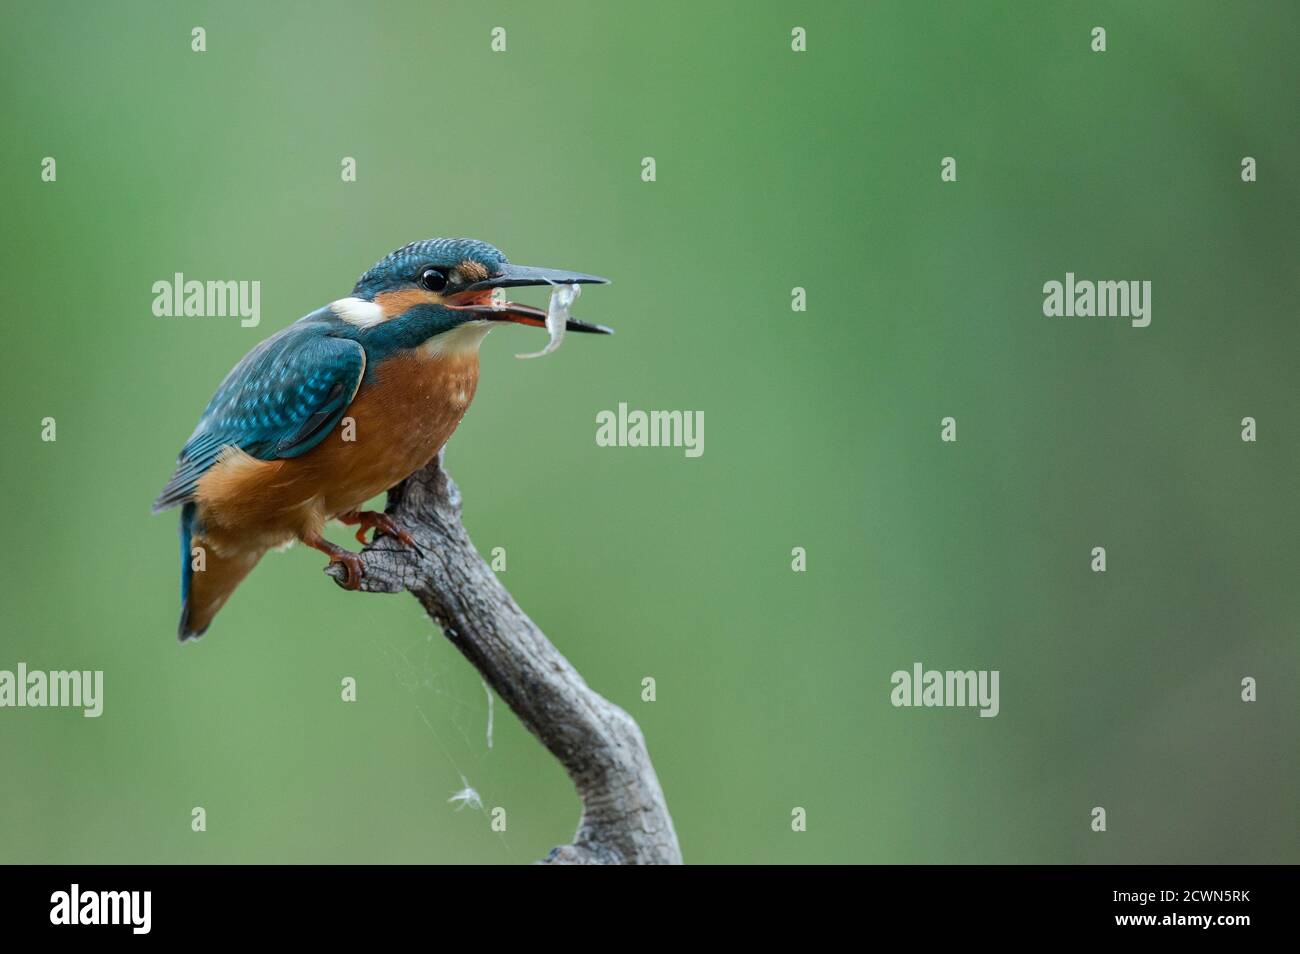 Kingfisher Eisvogel The Alcedo atthis is the only kingfisher species found in Europe. Stock Photo